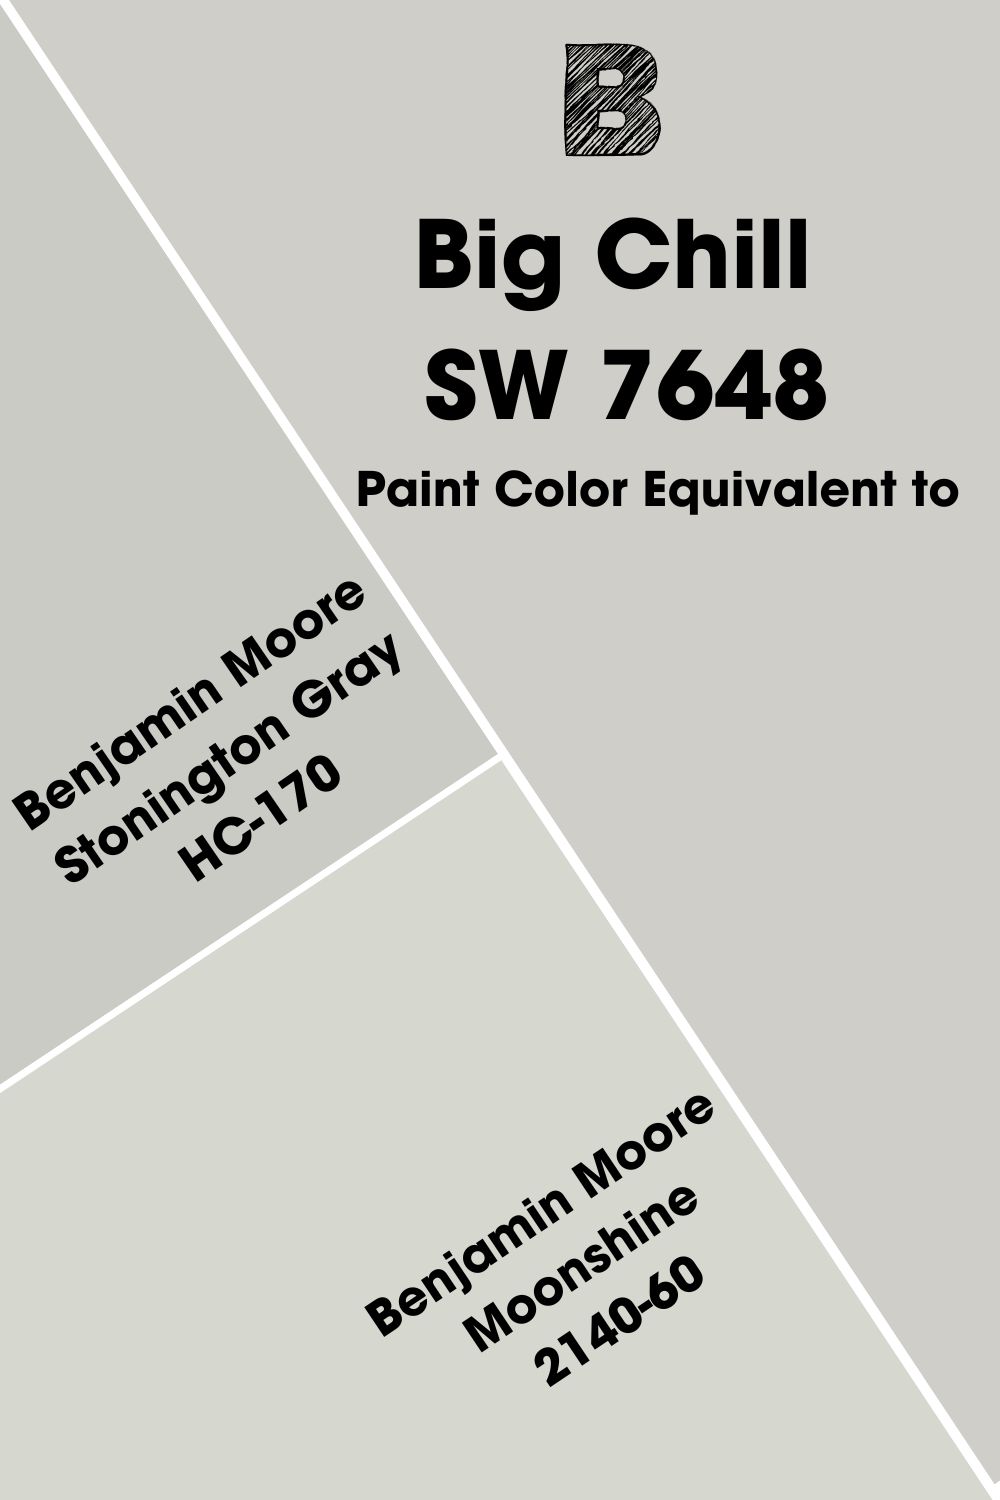  Paint Color Equivalent to